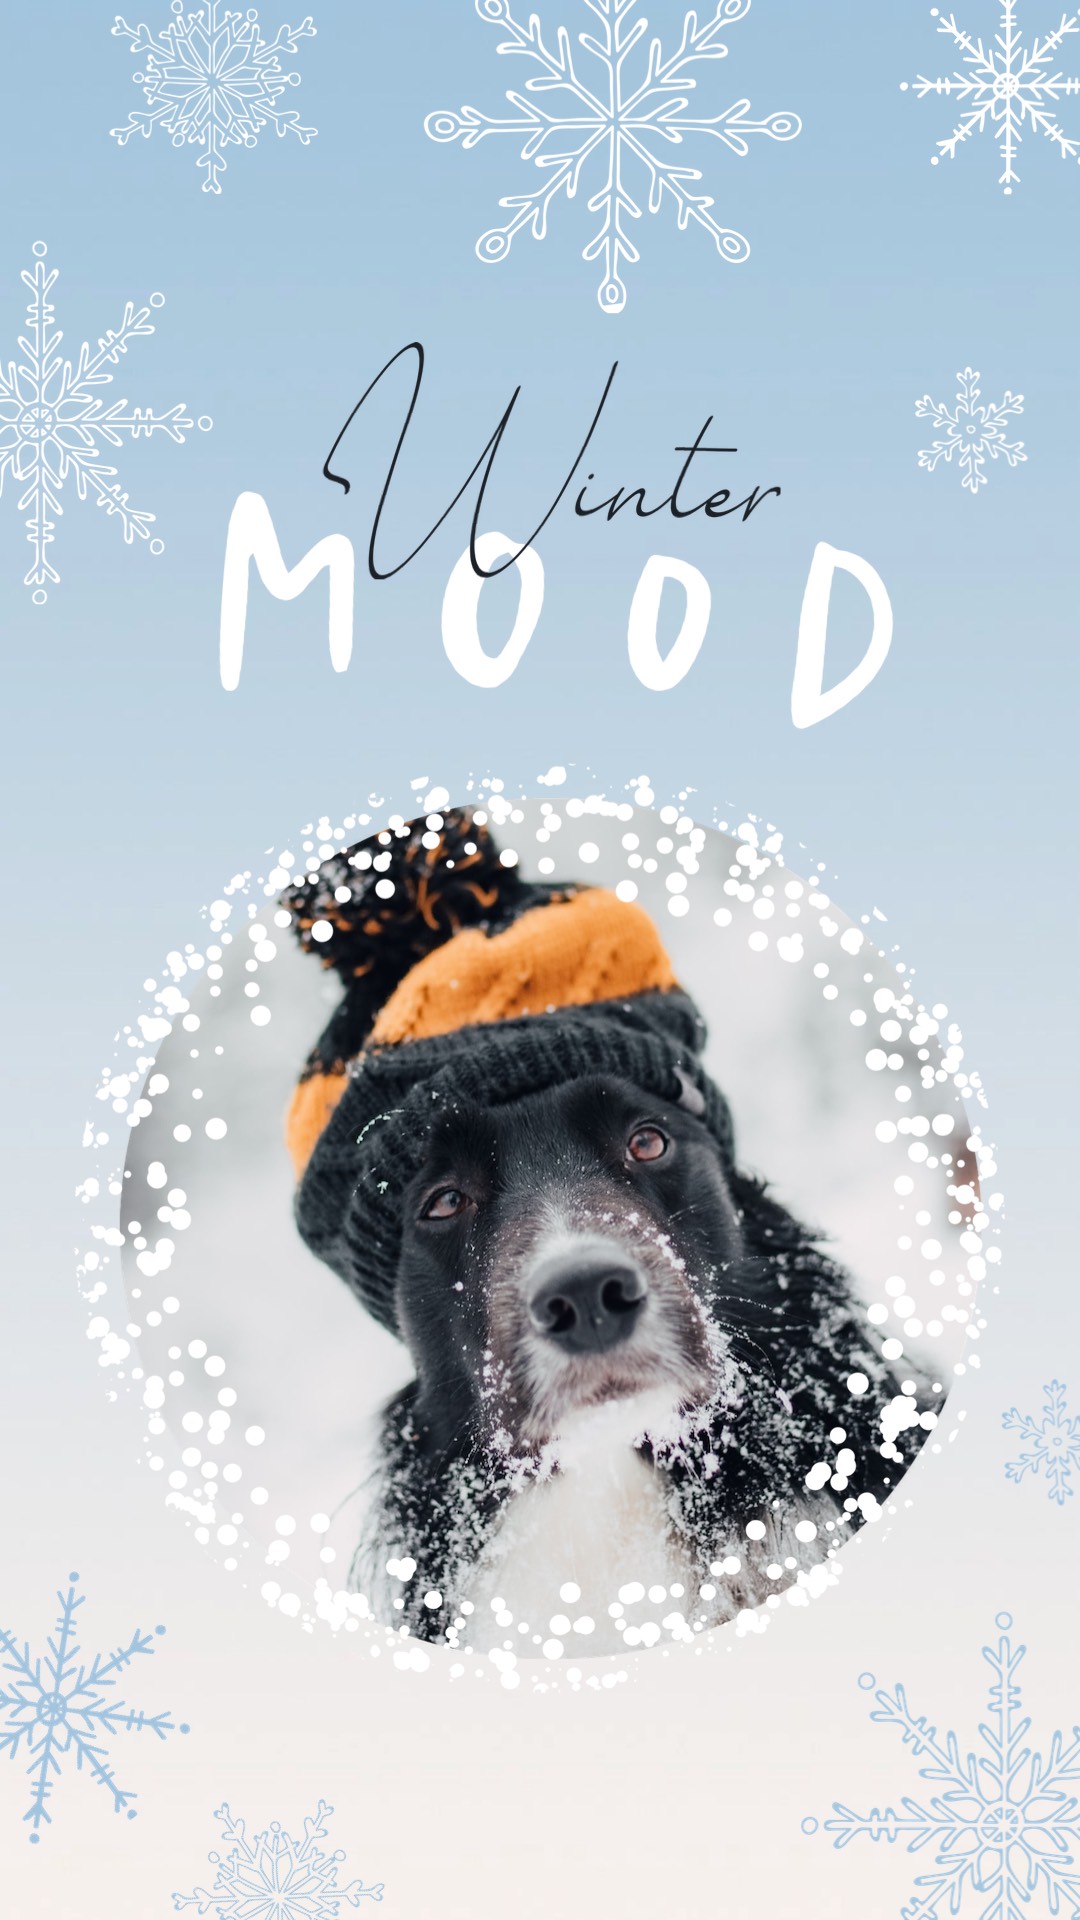 Dog wearing a hat while it snows "winter mood" Story template